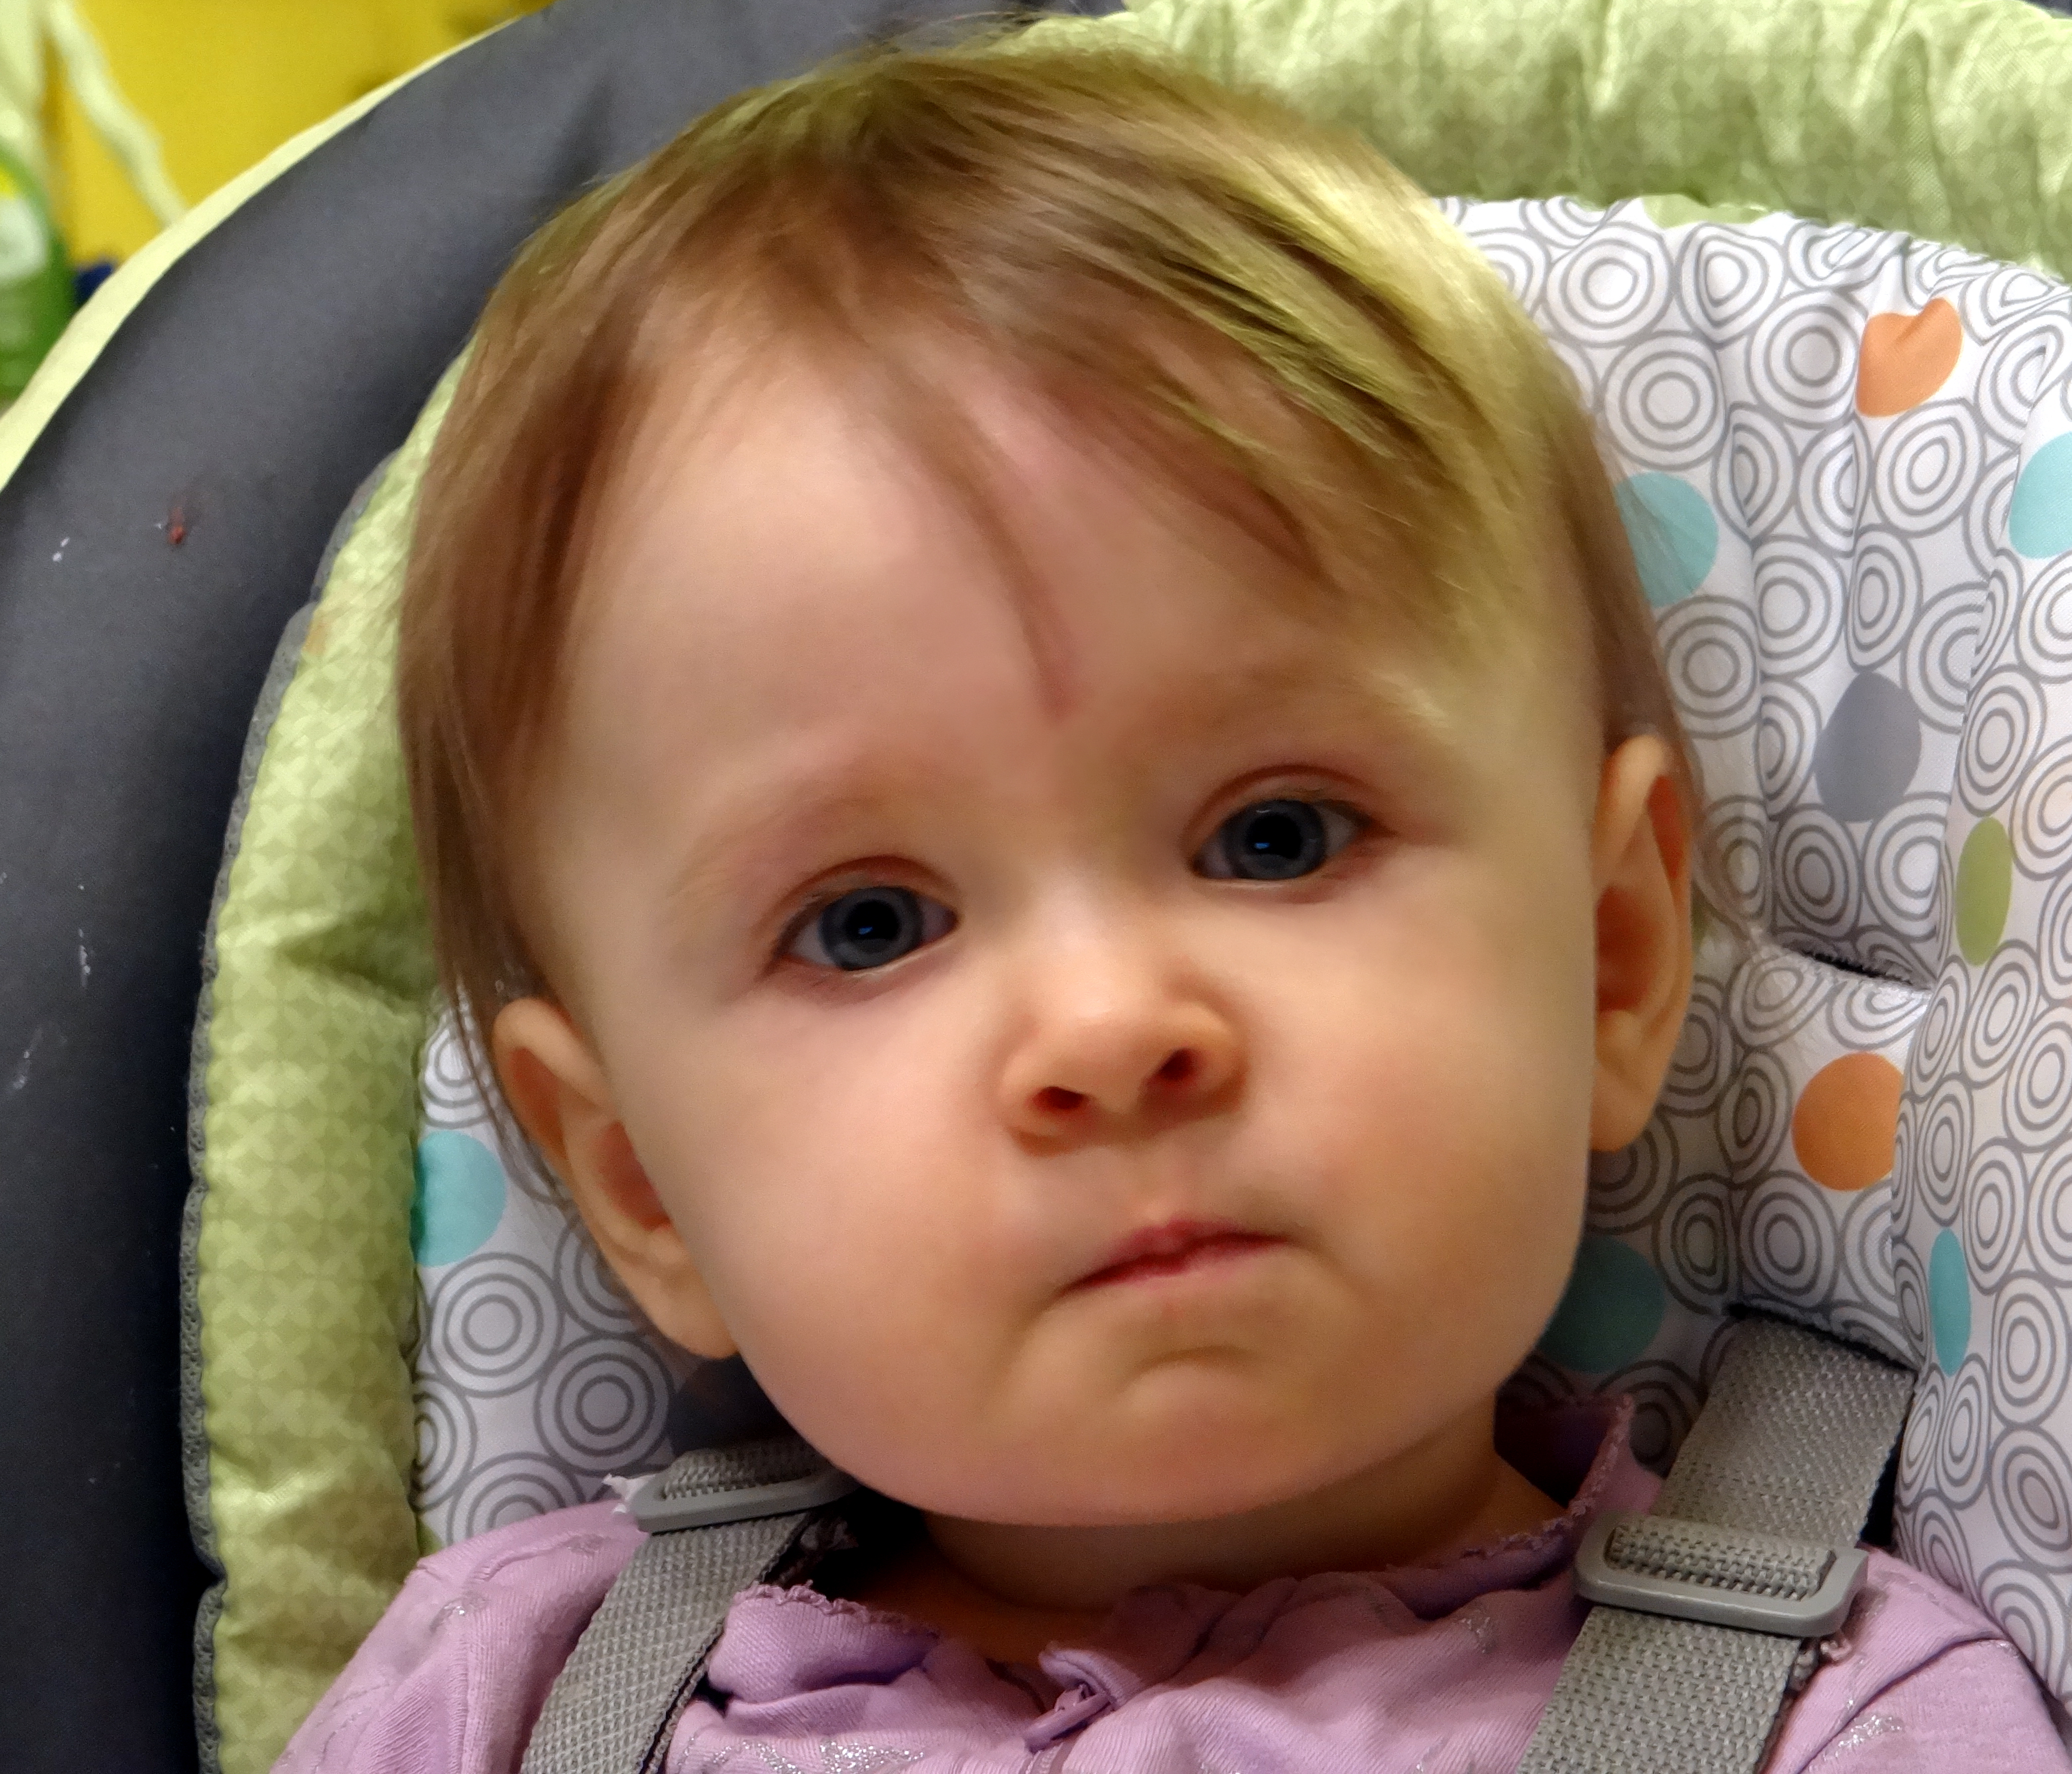 Baby in a high chair with a quizzical expression